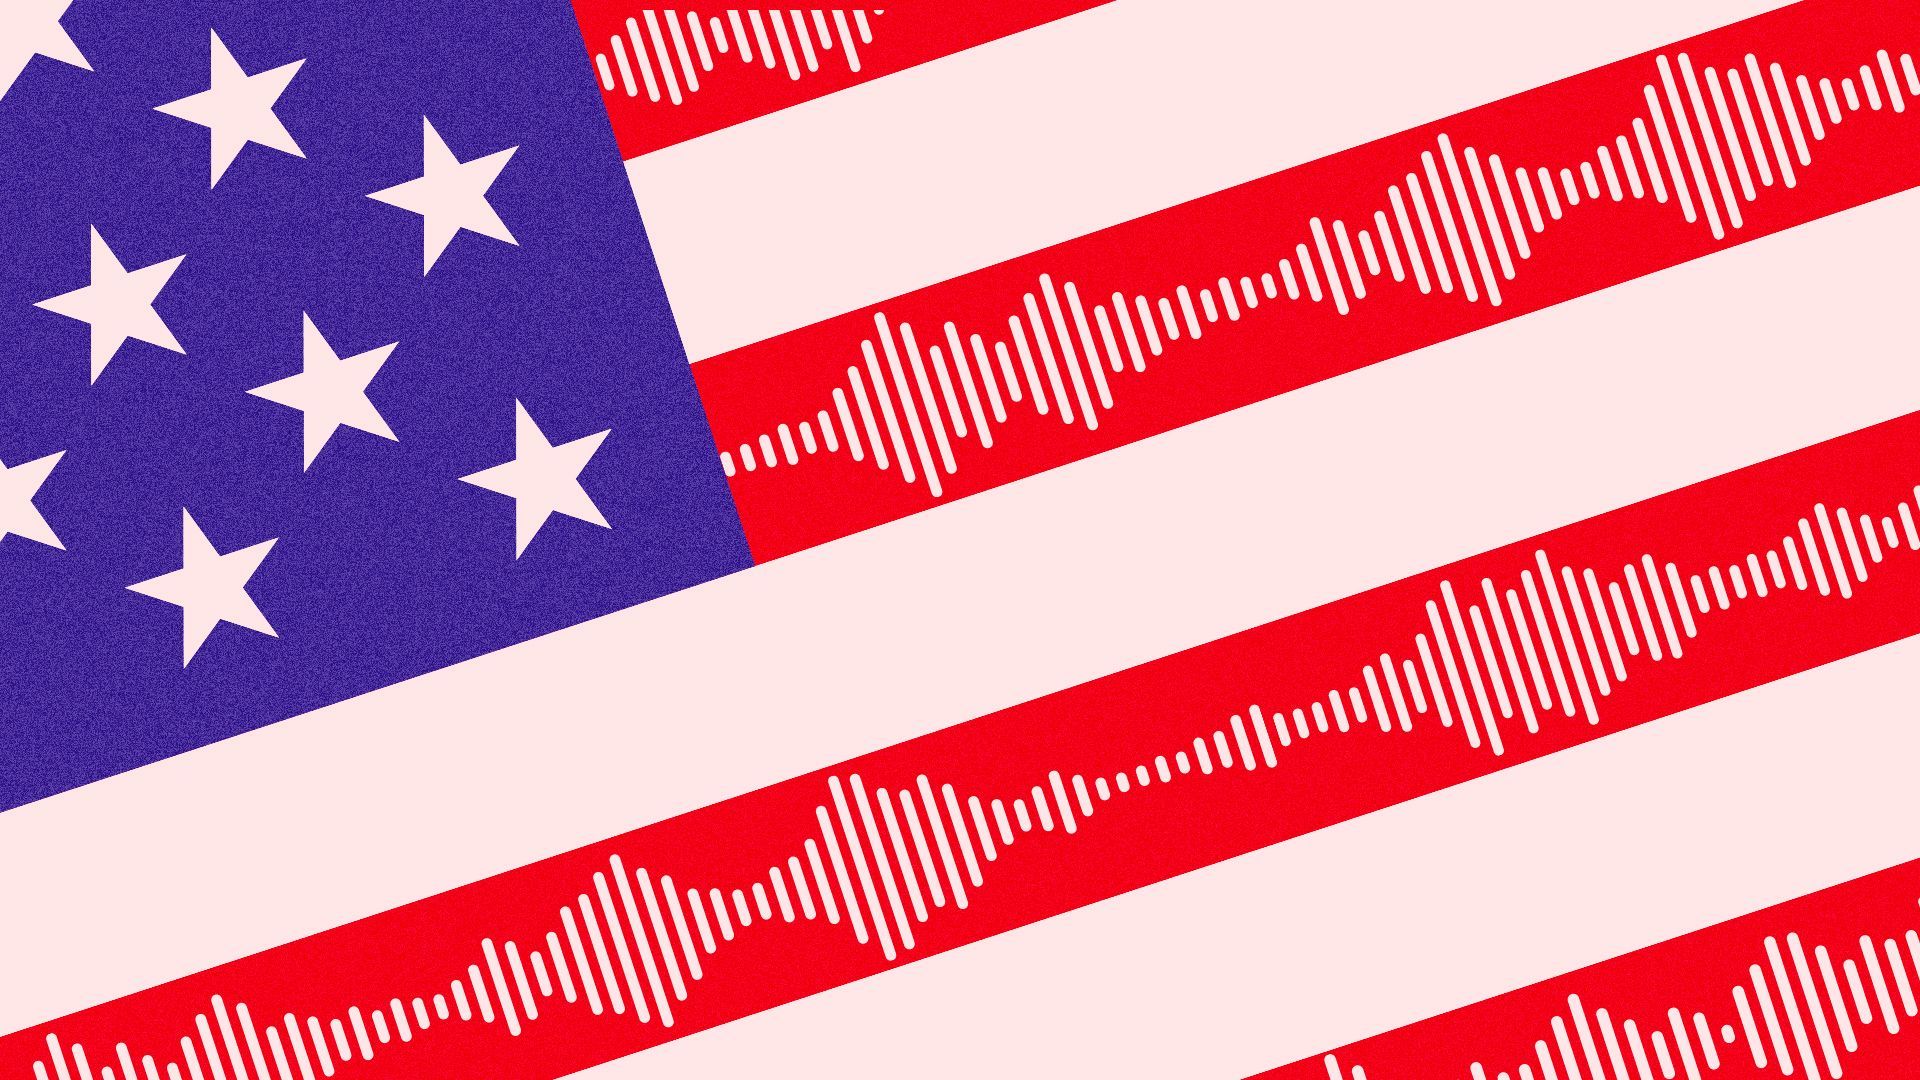 Illustration of the US flag with sound bars in the red stripes.